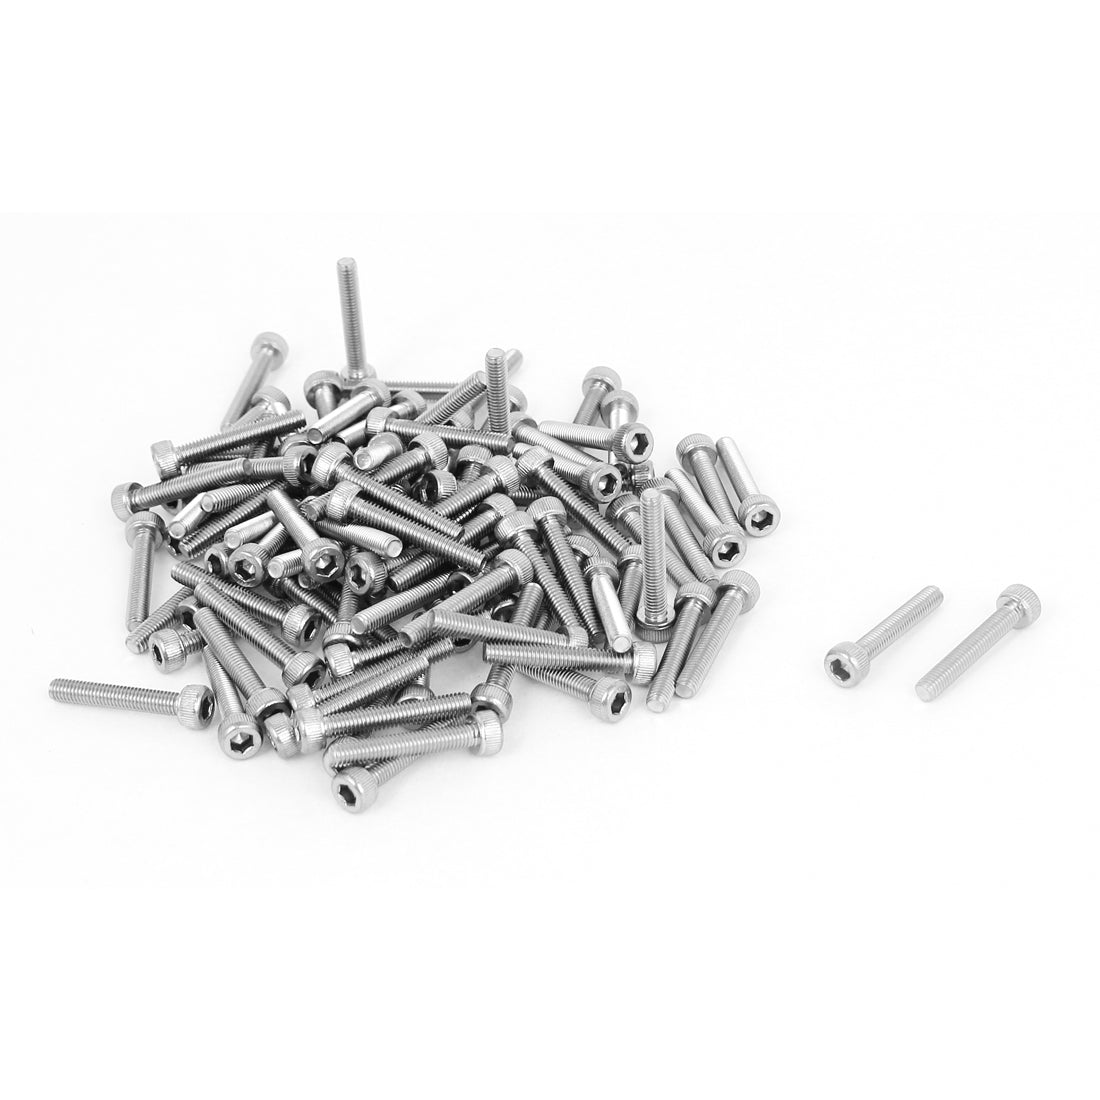 uxcell Uxcell M3x18mm 0.5mm Pitch Stainless Steel Bolts Hex Key Socket Cap Head Screws 100pcs